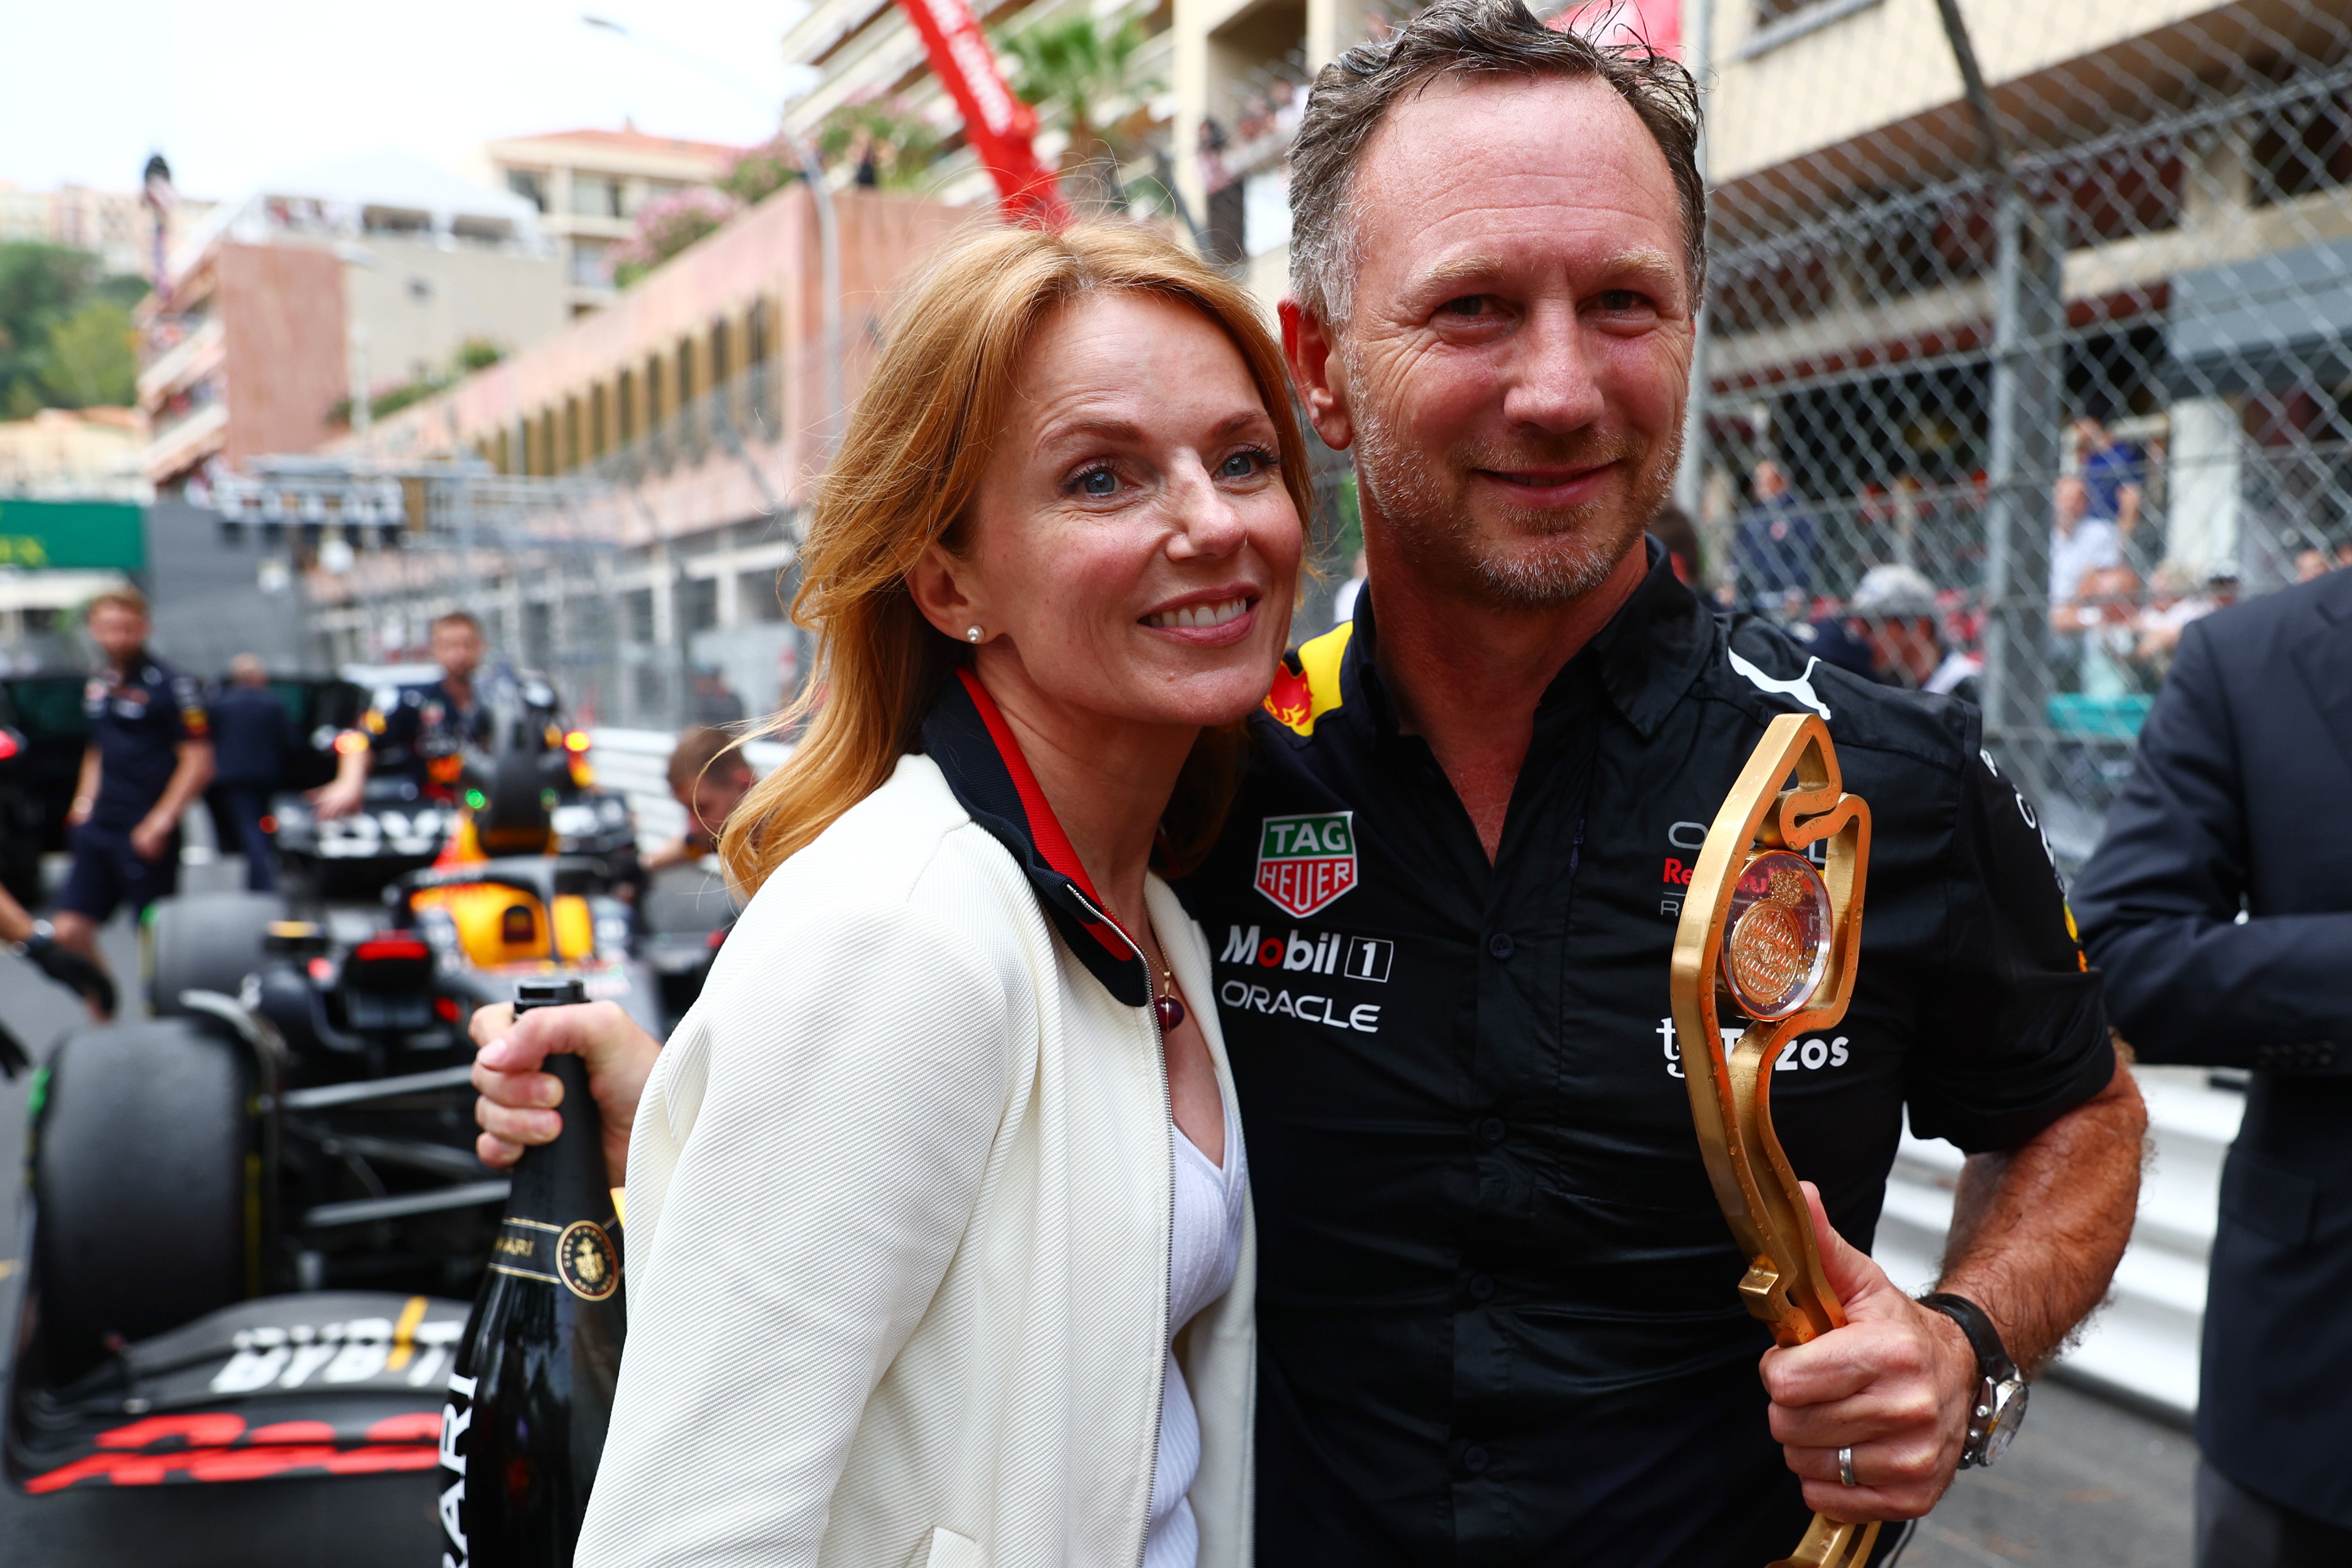 The Red Bull team principal is married to Spice Girl member Geri Horner